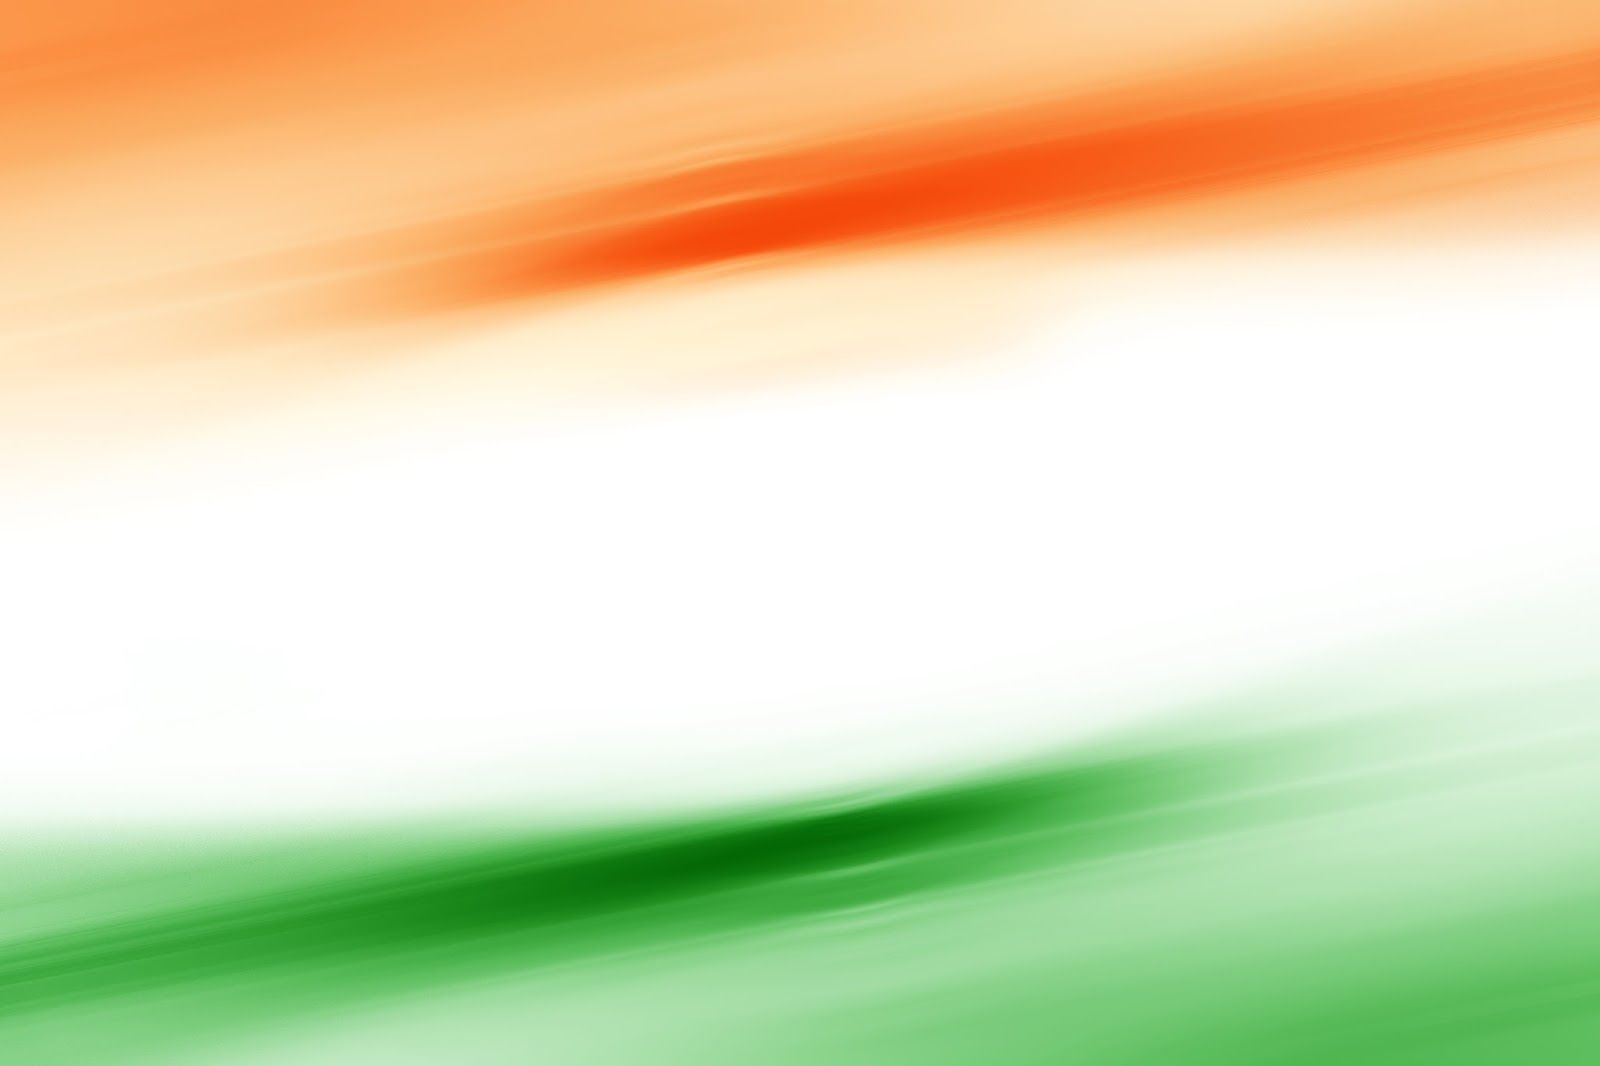 Indian Flag Abstract Wallpaper Free Indian Flag Abstract Background